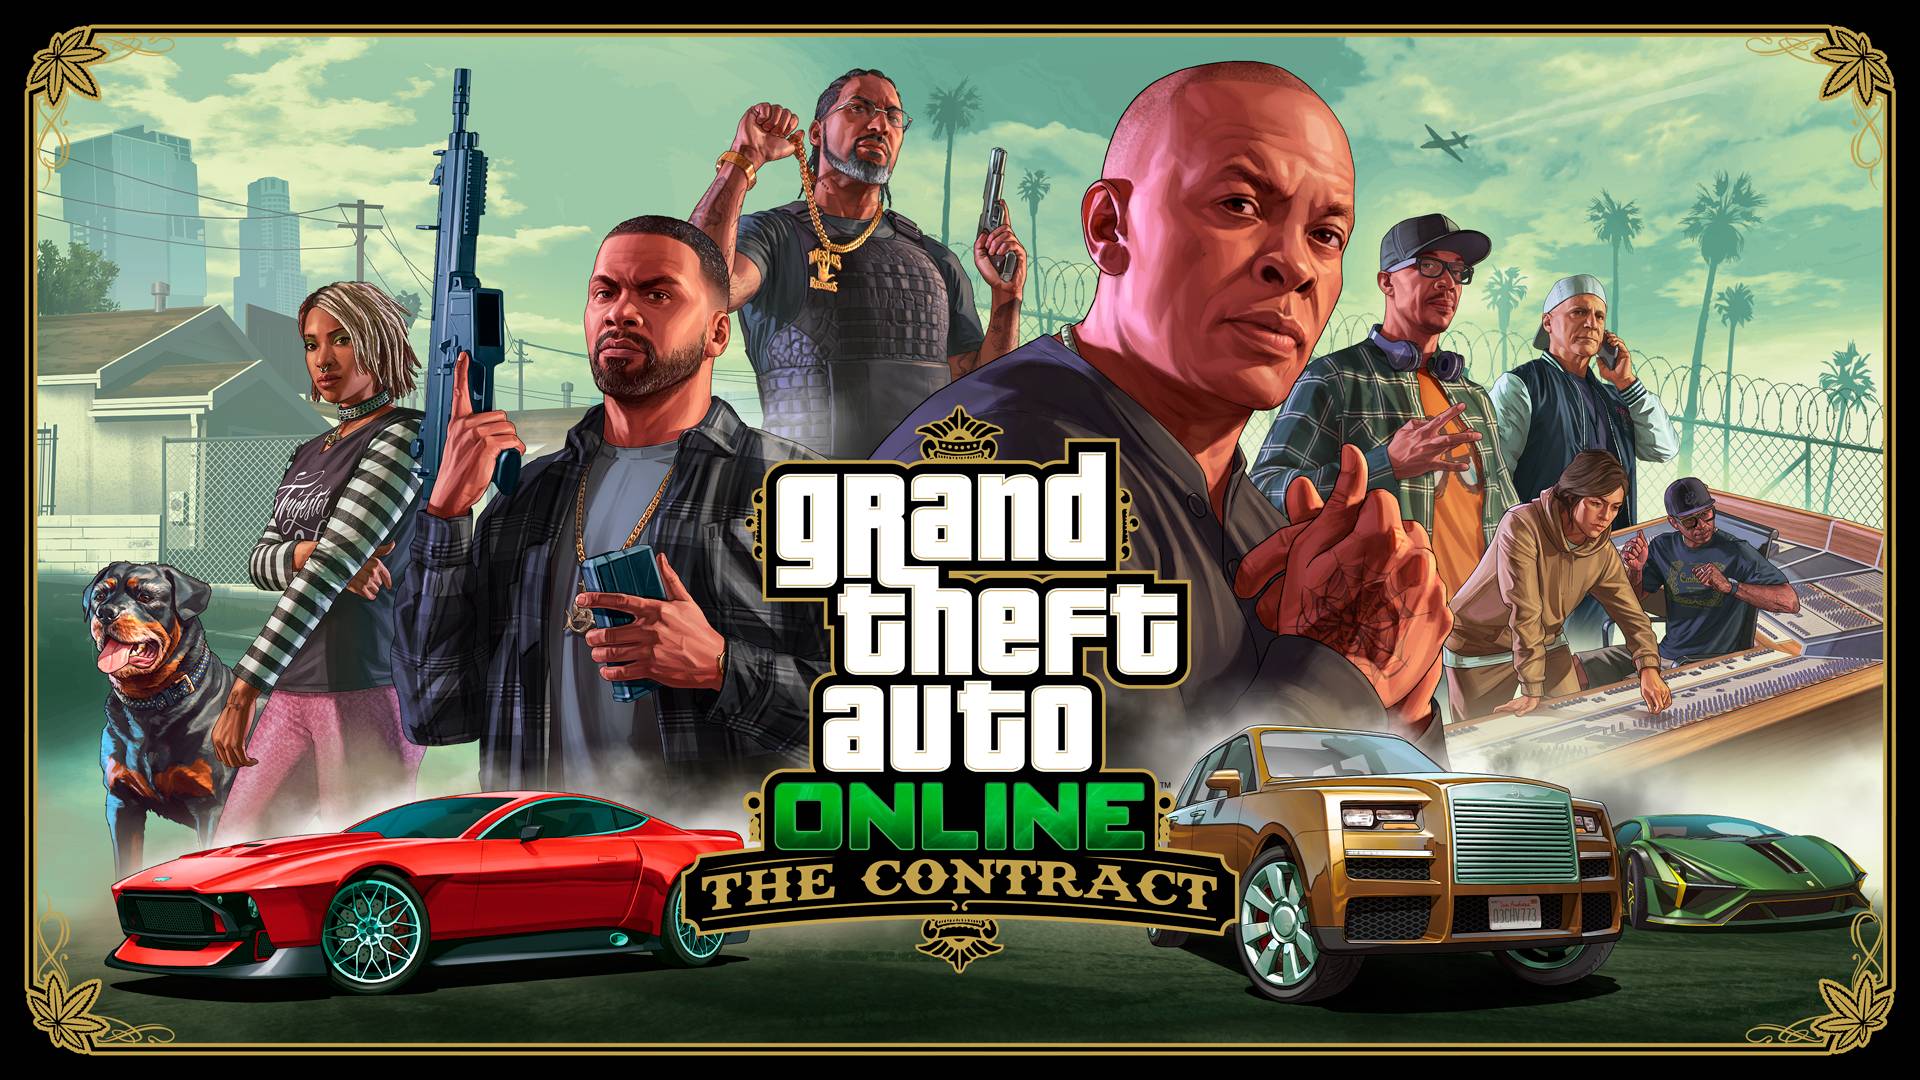 04202022-dr-dre-gta-online-the-contract-carousel